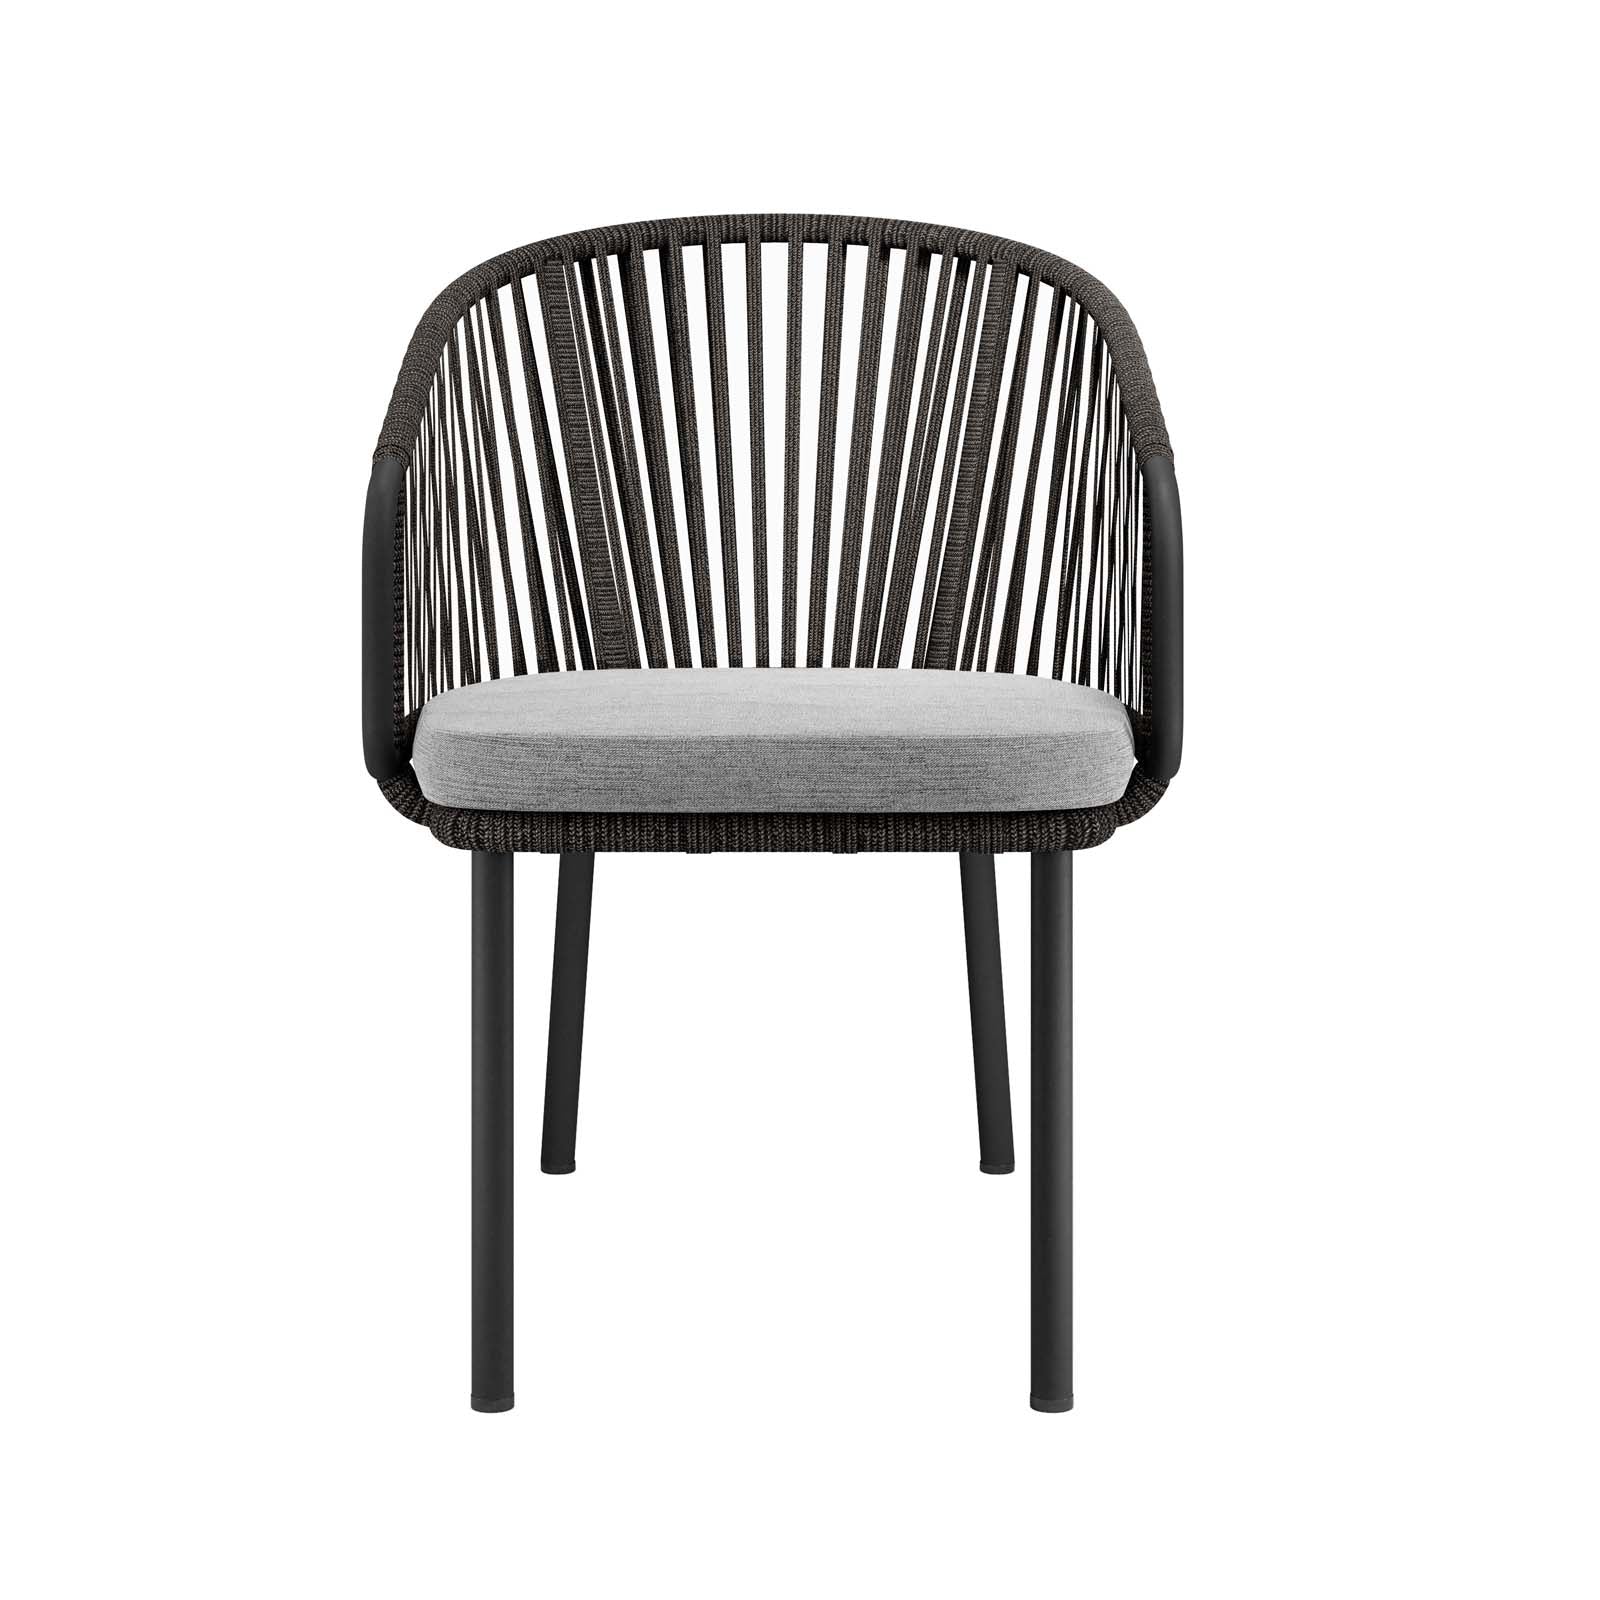 Harbor Outdoor Patio Armchair - East Shore Modern Home Furnishings